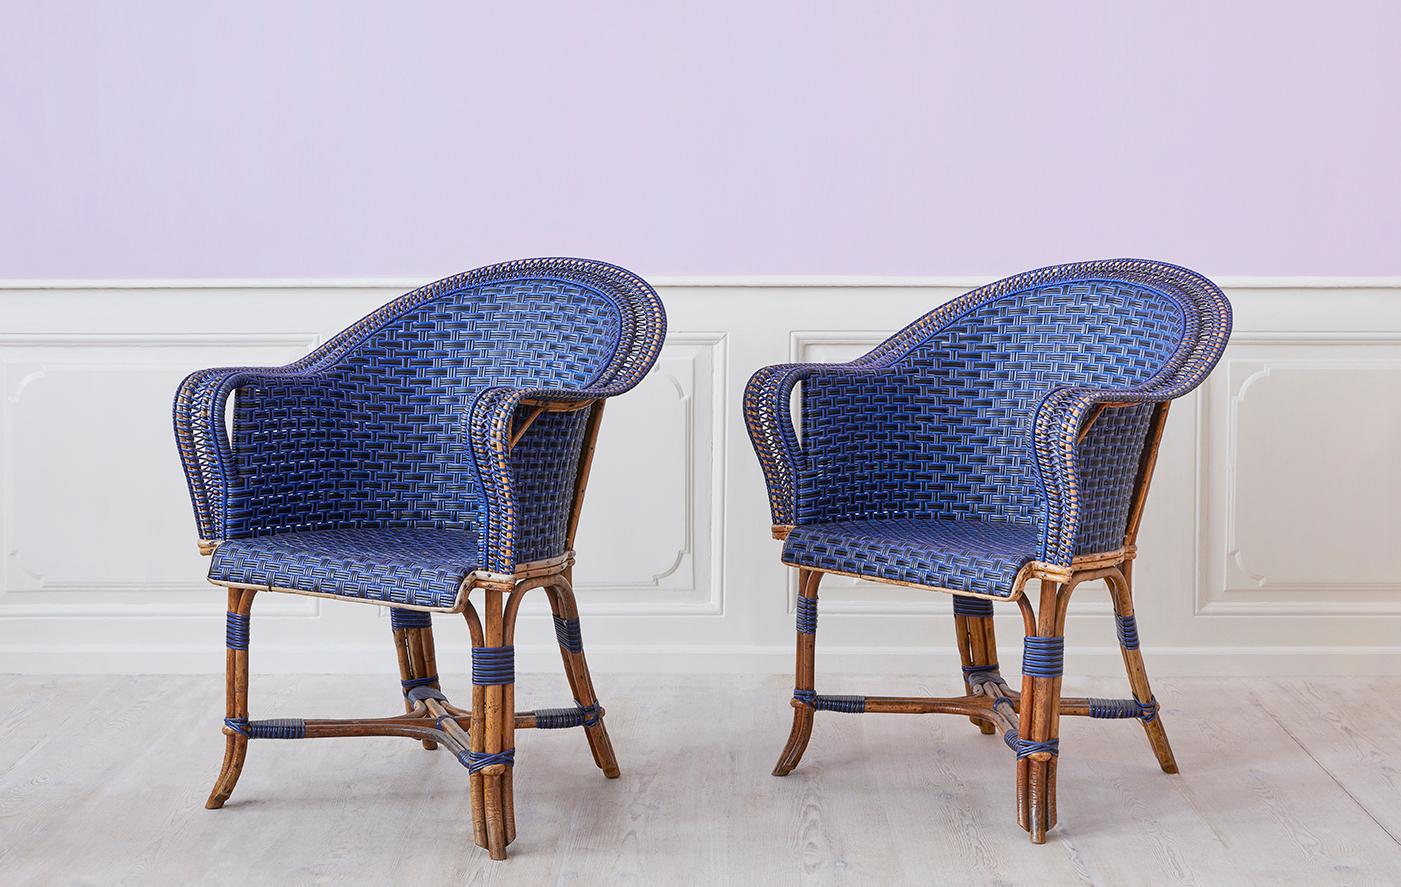 France, early 20th Century

A pair of armchairs in blue and black rattan. 

H 89 x W 71 x D 89 cm